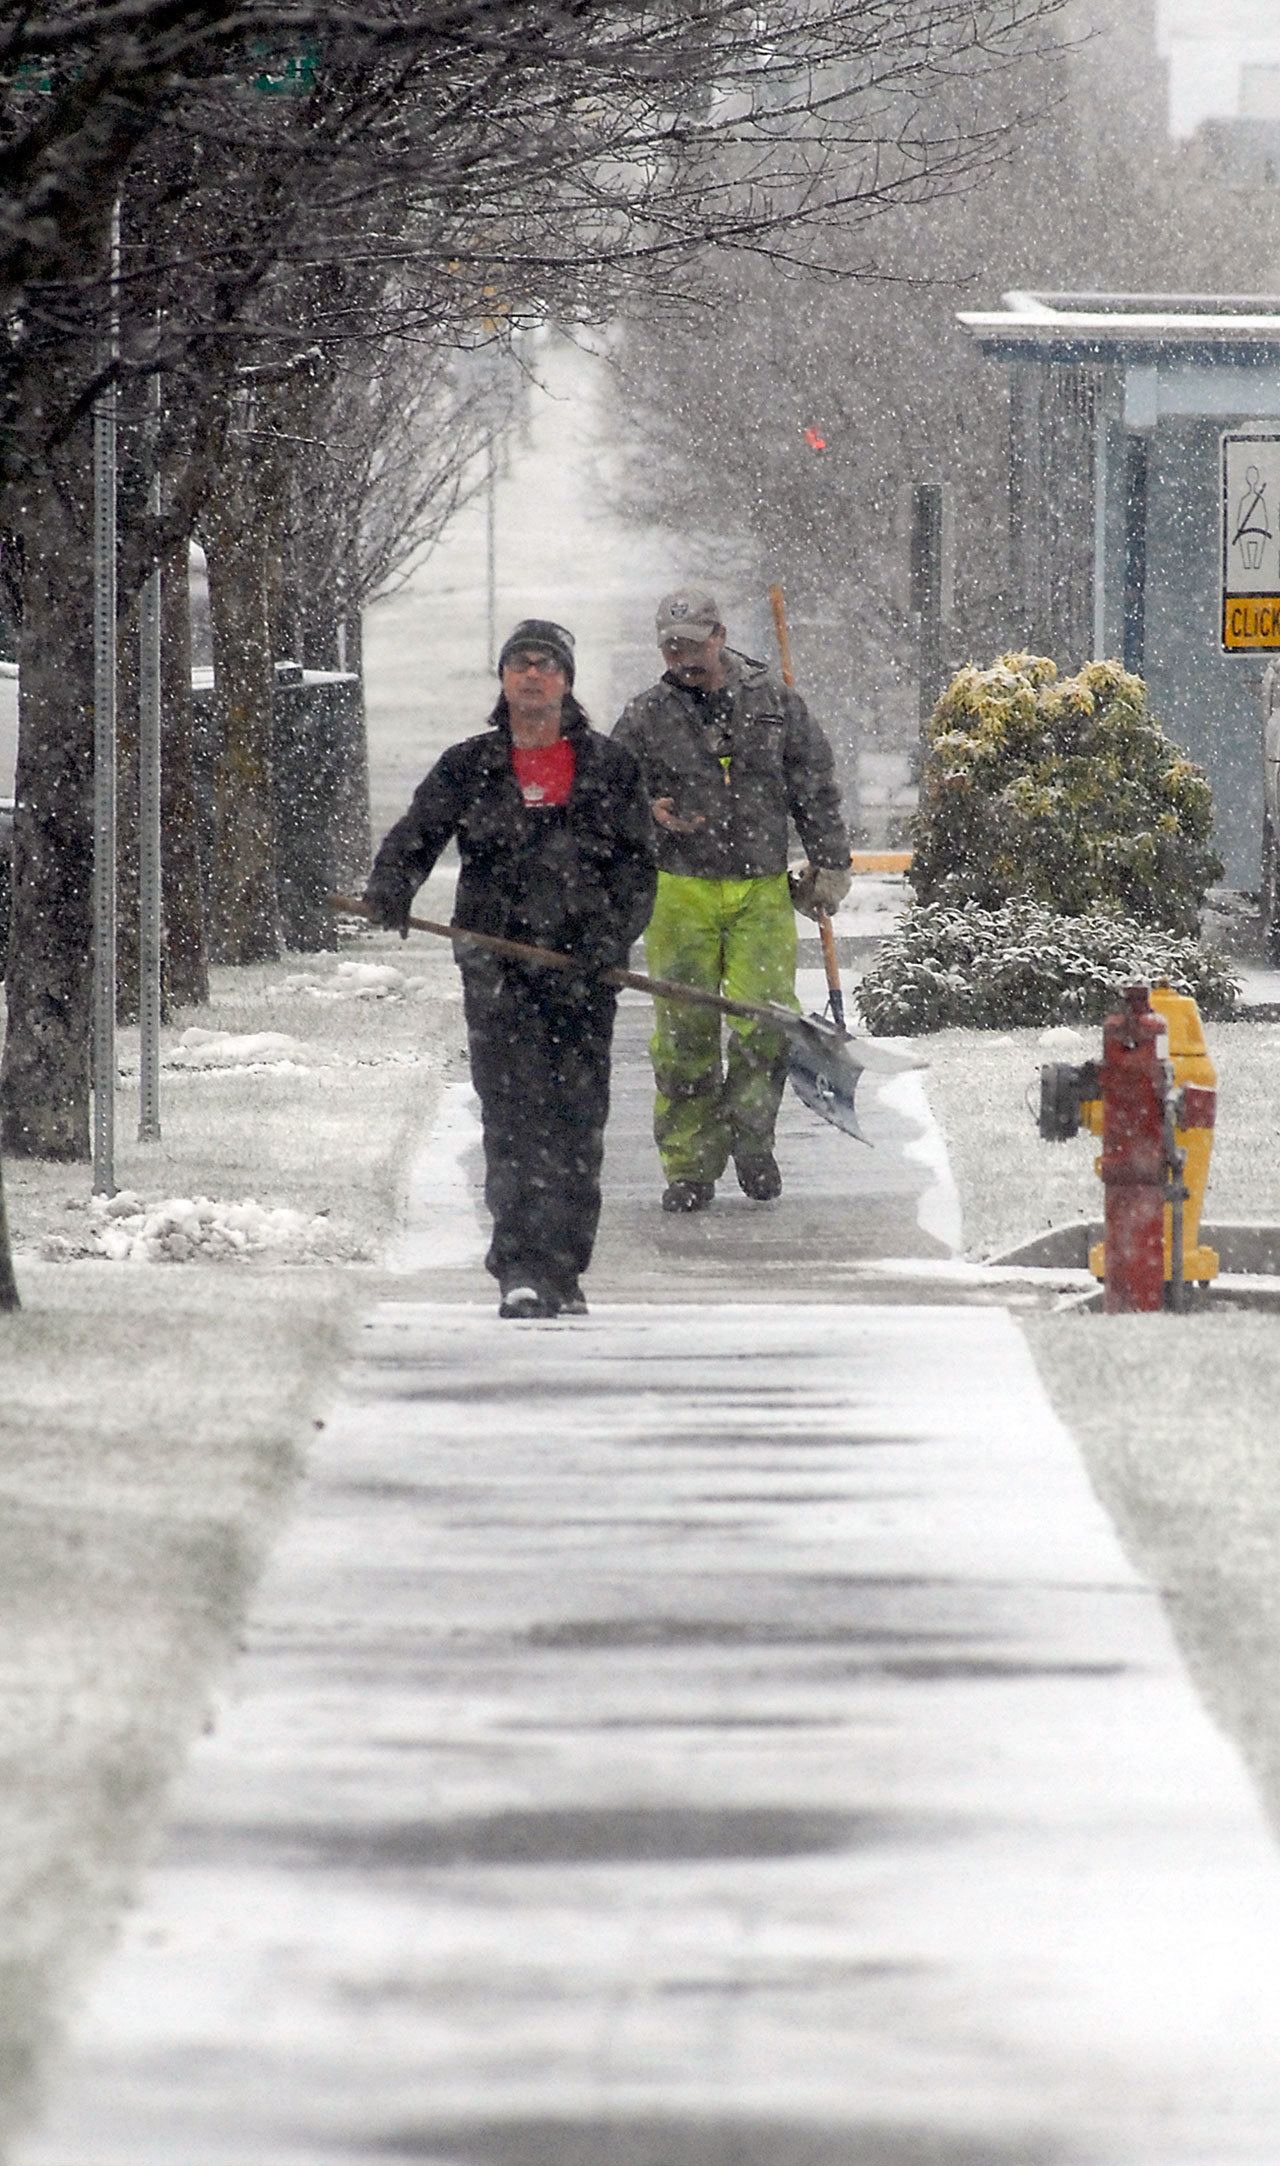 Port Angeles Parks Department workers Eli Hammel, left, and Leon Leonard carry snow shovels along a snowy stretch of sidewalk on East Fifth Street in front of Port Angeles City Hall on Tuesday. (Keith Thorpe/Peninsula Daily News)